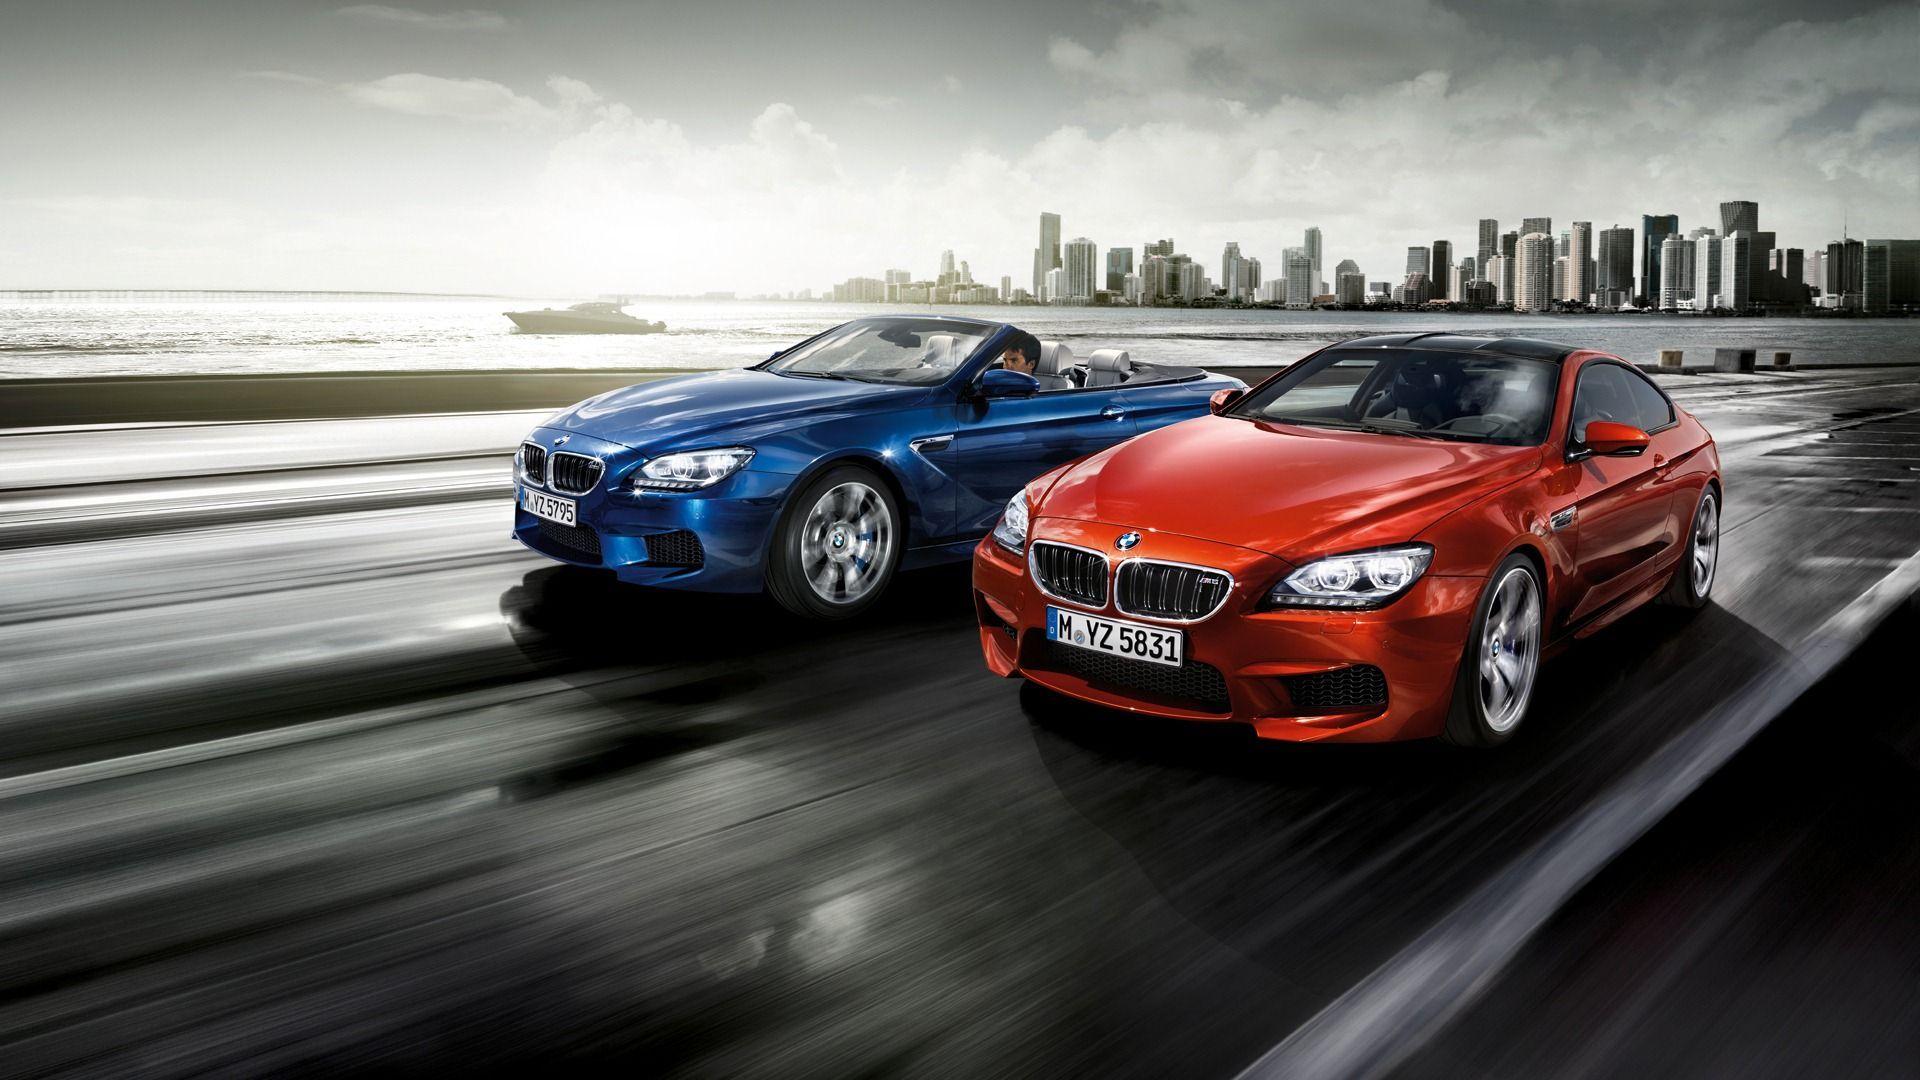 Hd Wallpaper Background For Your Desktop Pc All Bmw Cars Cars